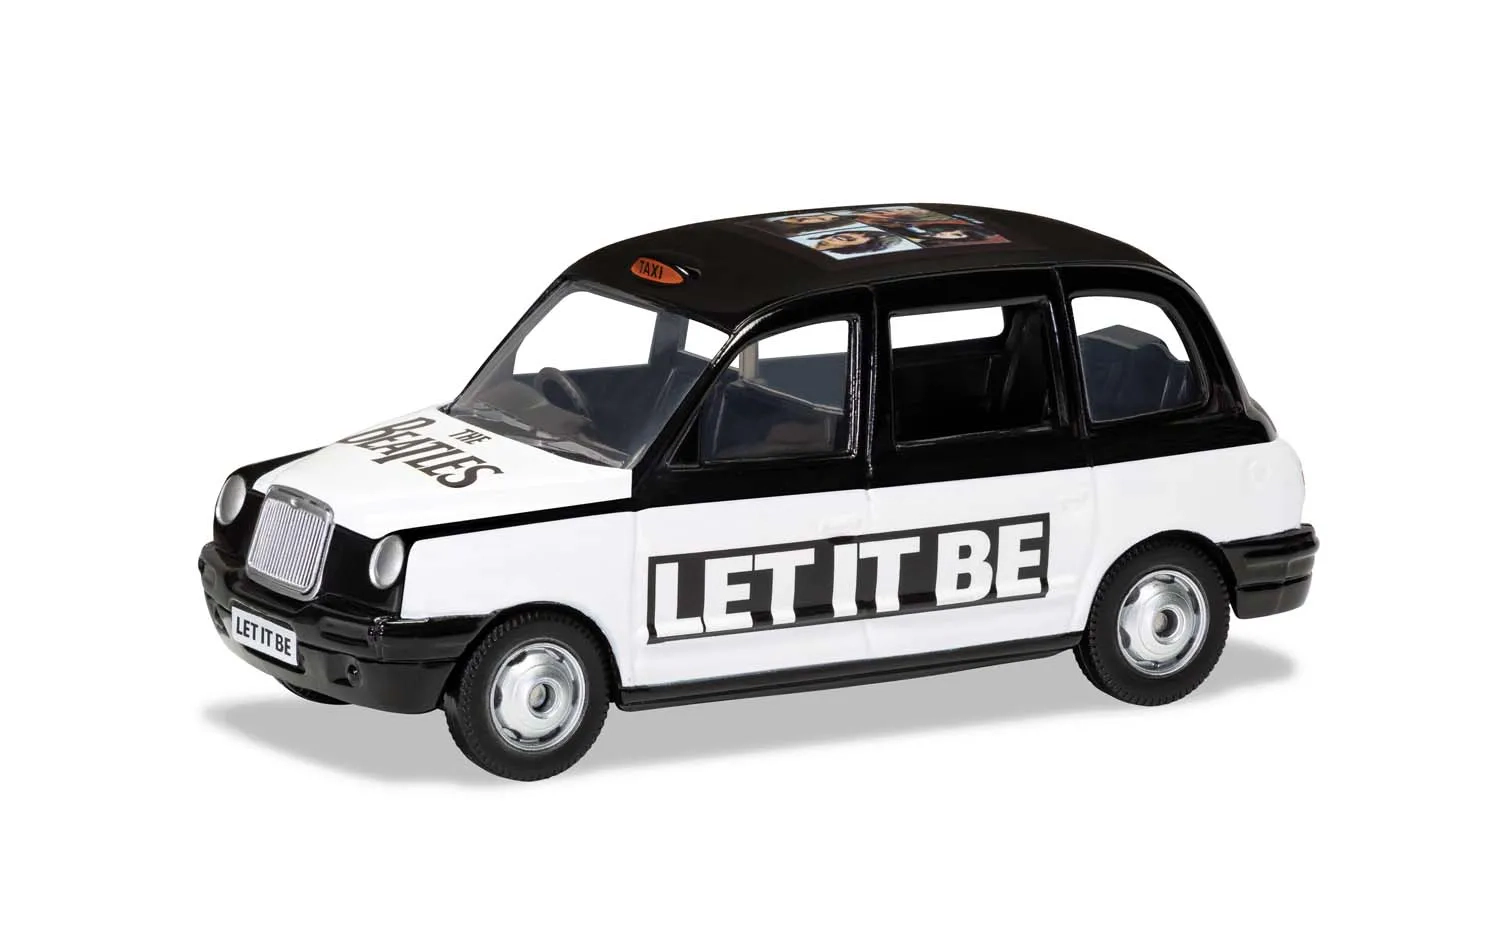 The Beatles London Taxi - Let it Be